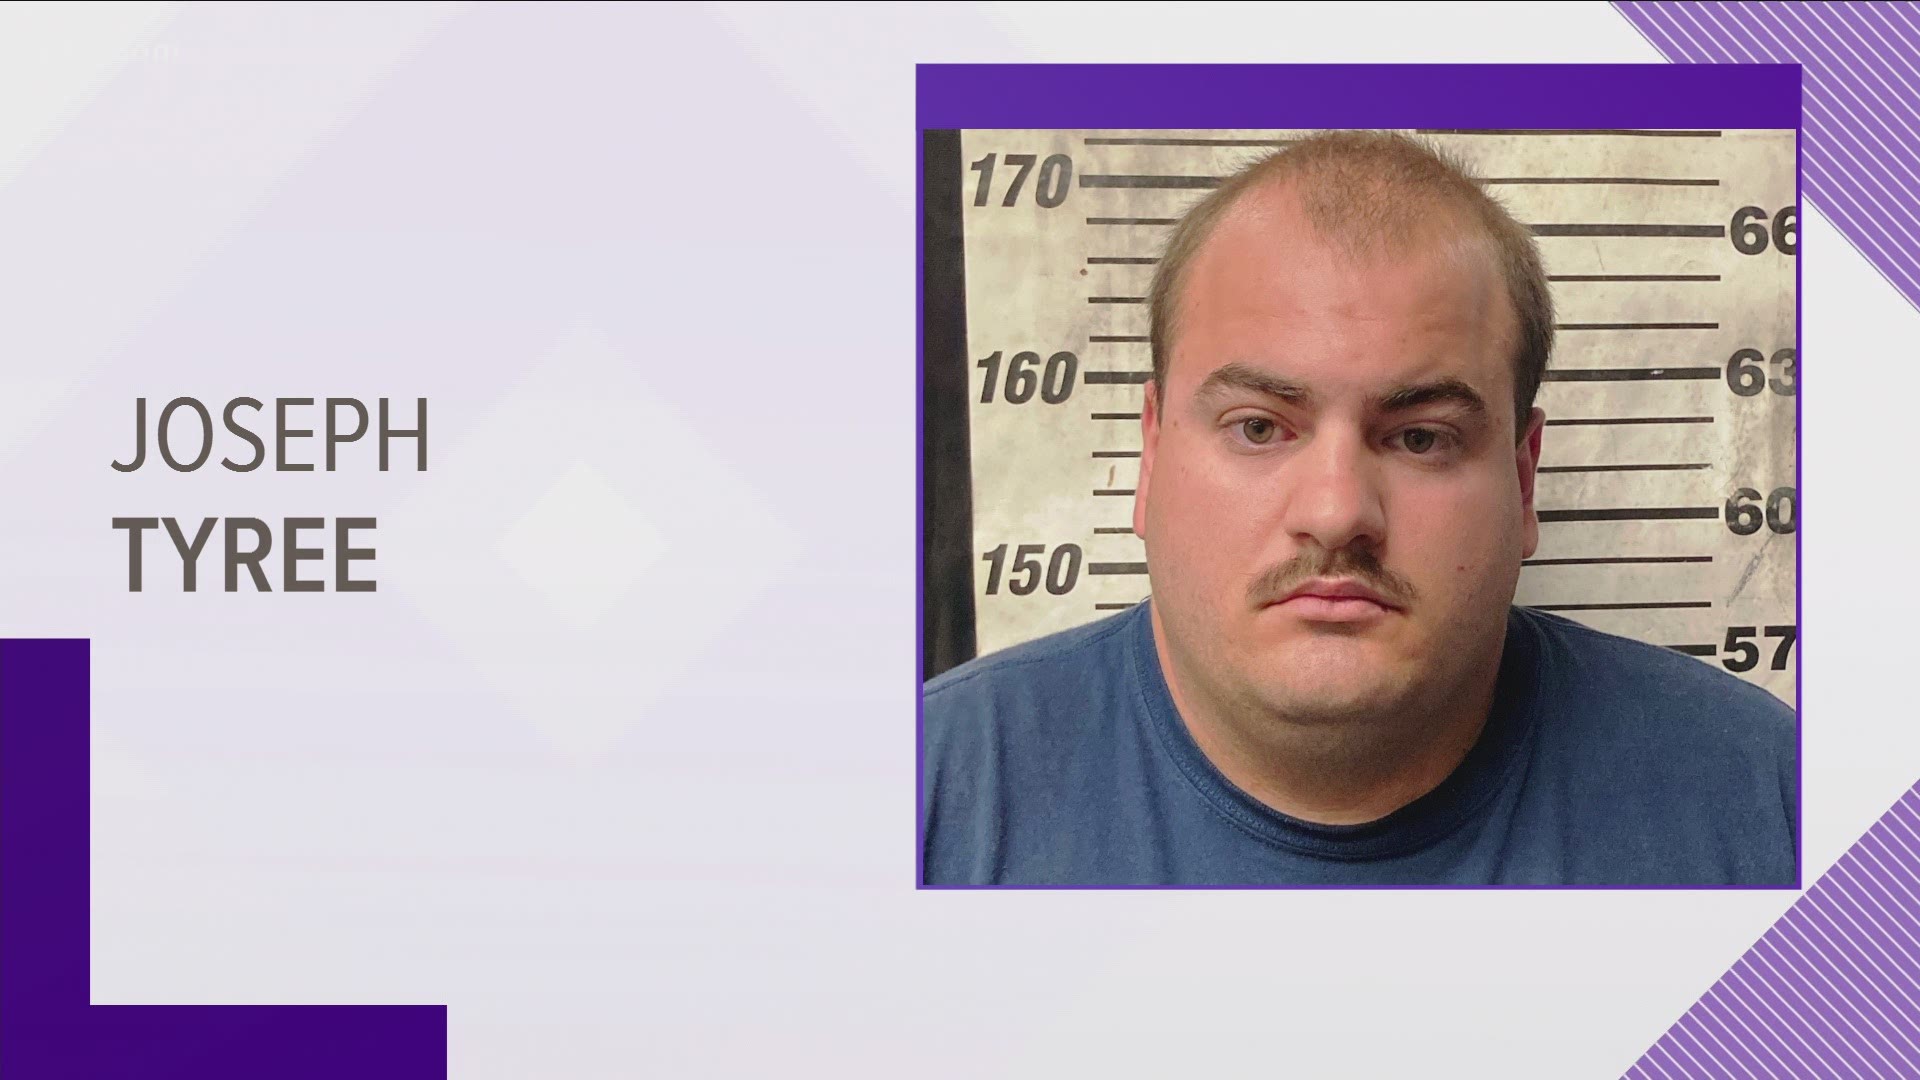 A former corrections officer is now in jail, accused of conspiring to harm an inmate.